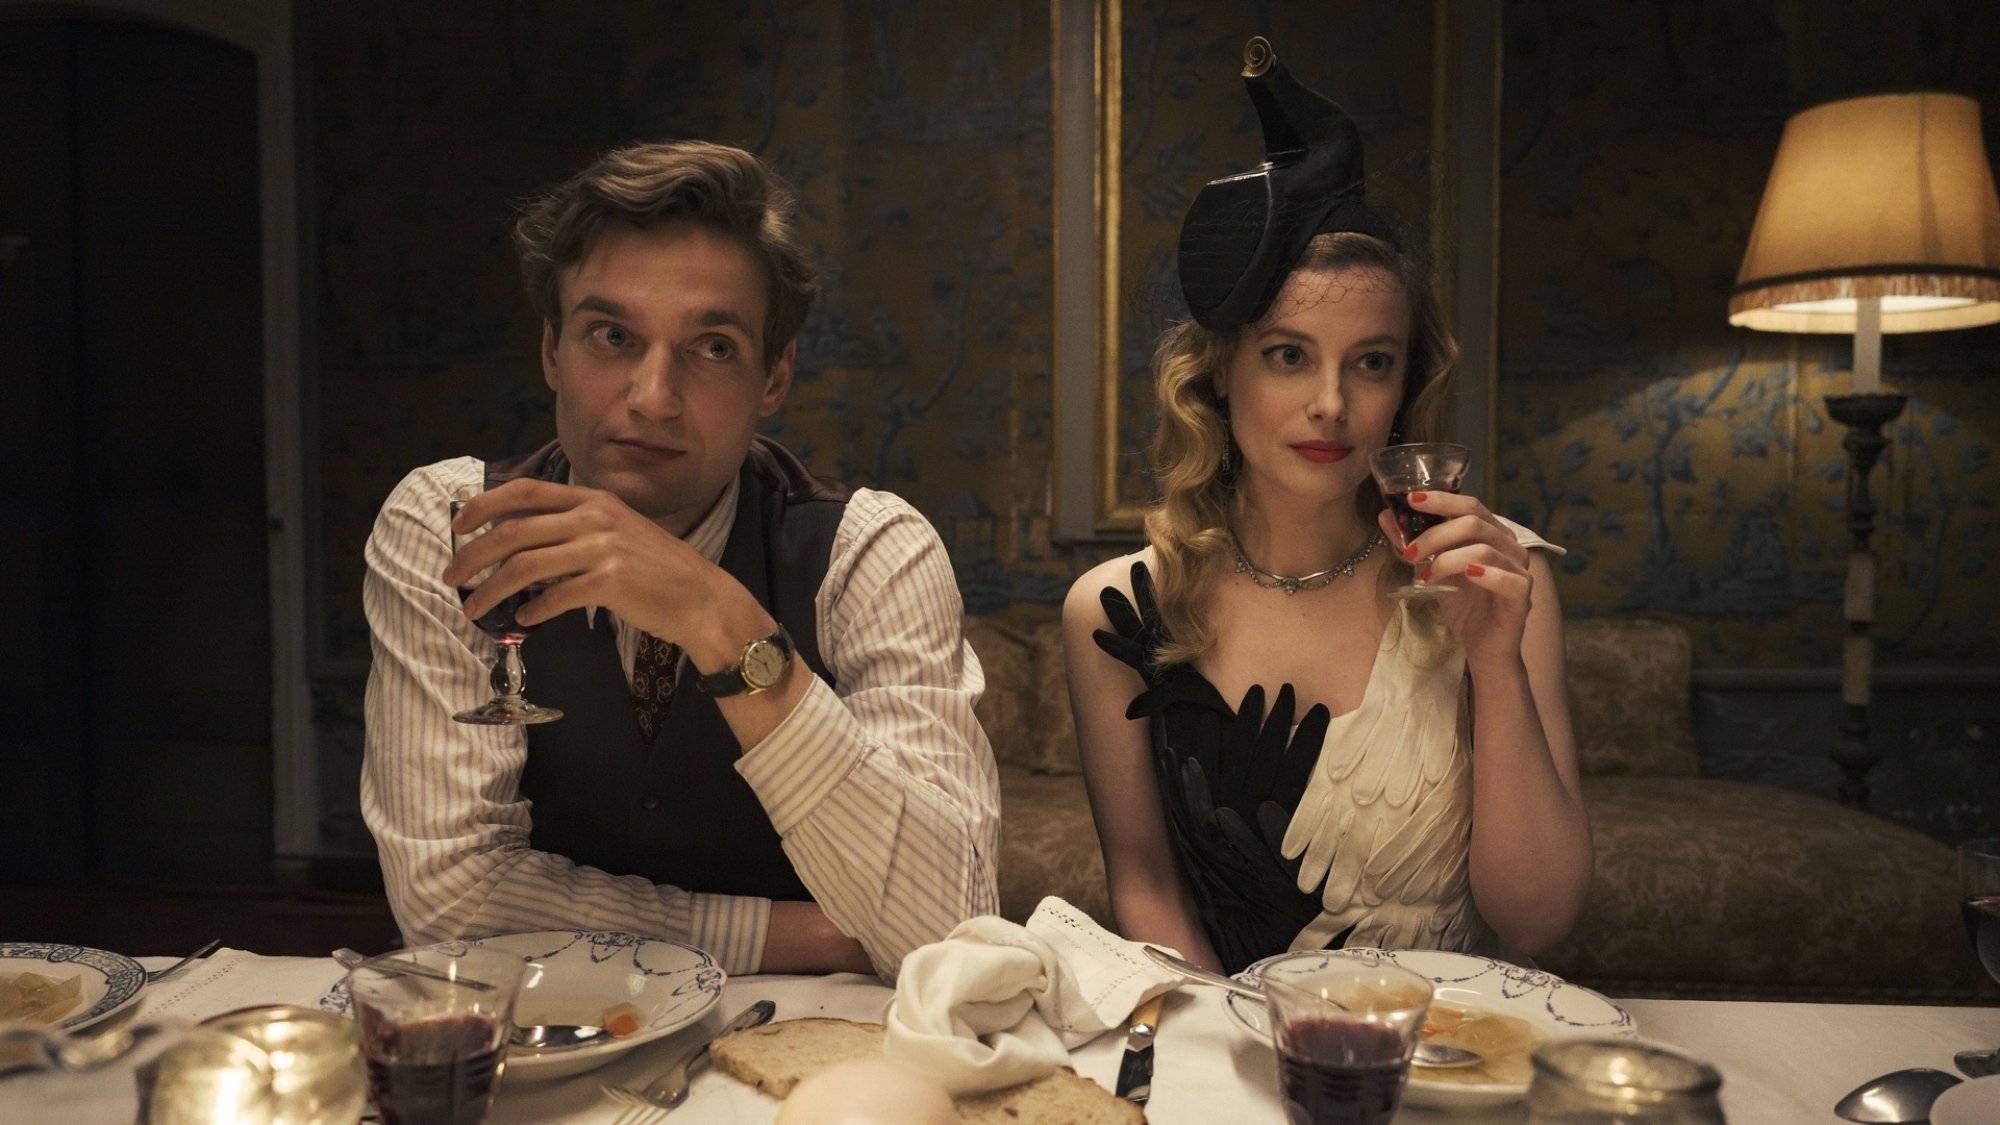 A man and woman in chic attire attend a dinner party.